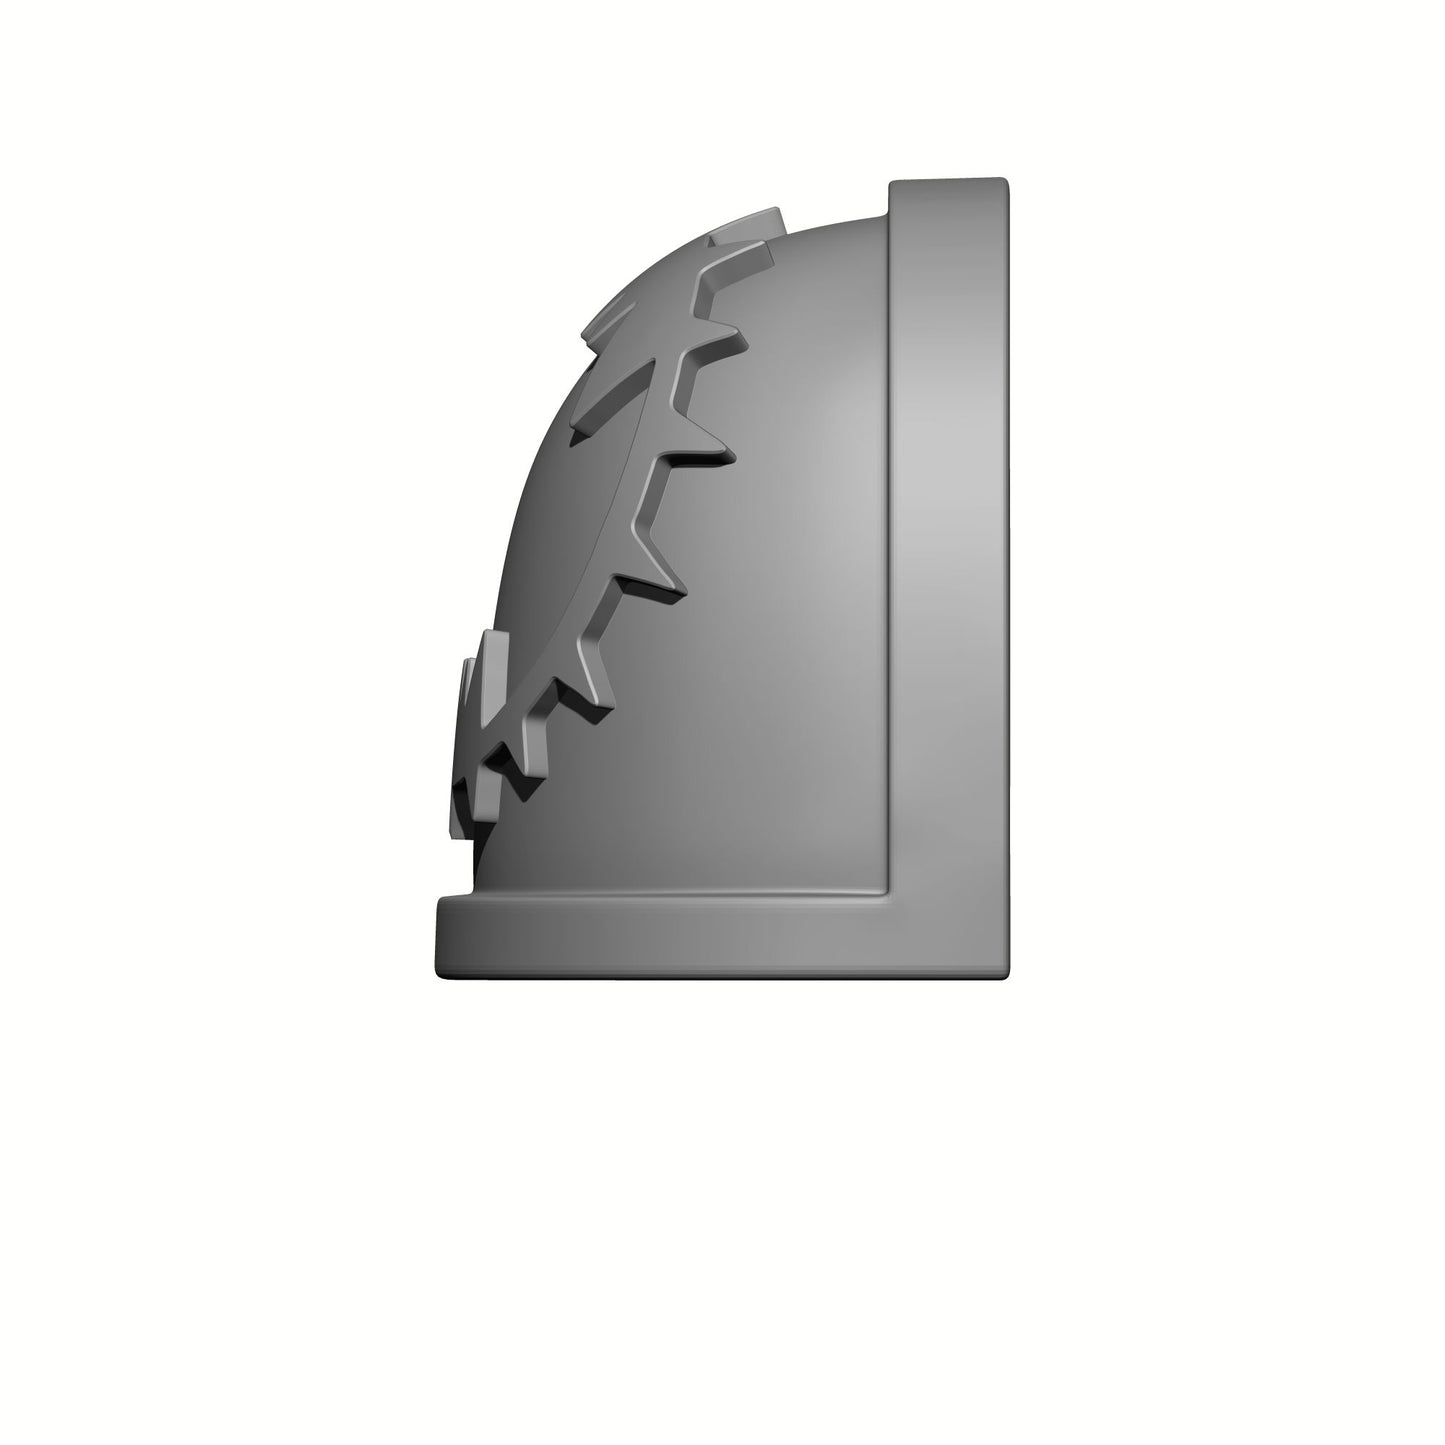 World Eaters Chapter MKIV Shoulder Pad Teeth Icon is Compatible with McFarlane Space Marine Action Figures Left Angle